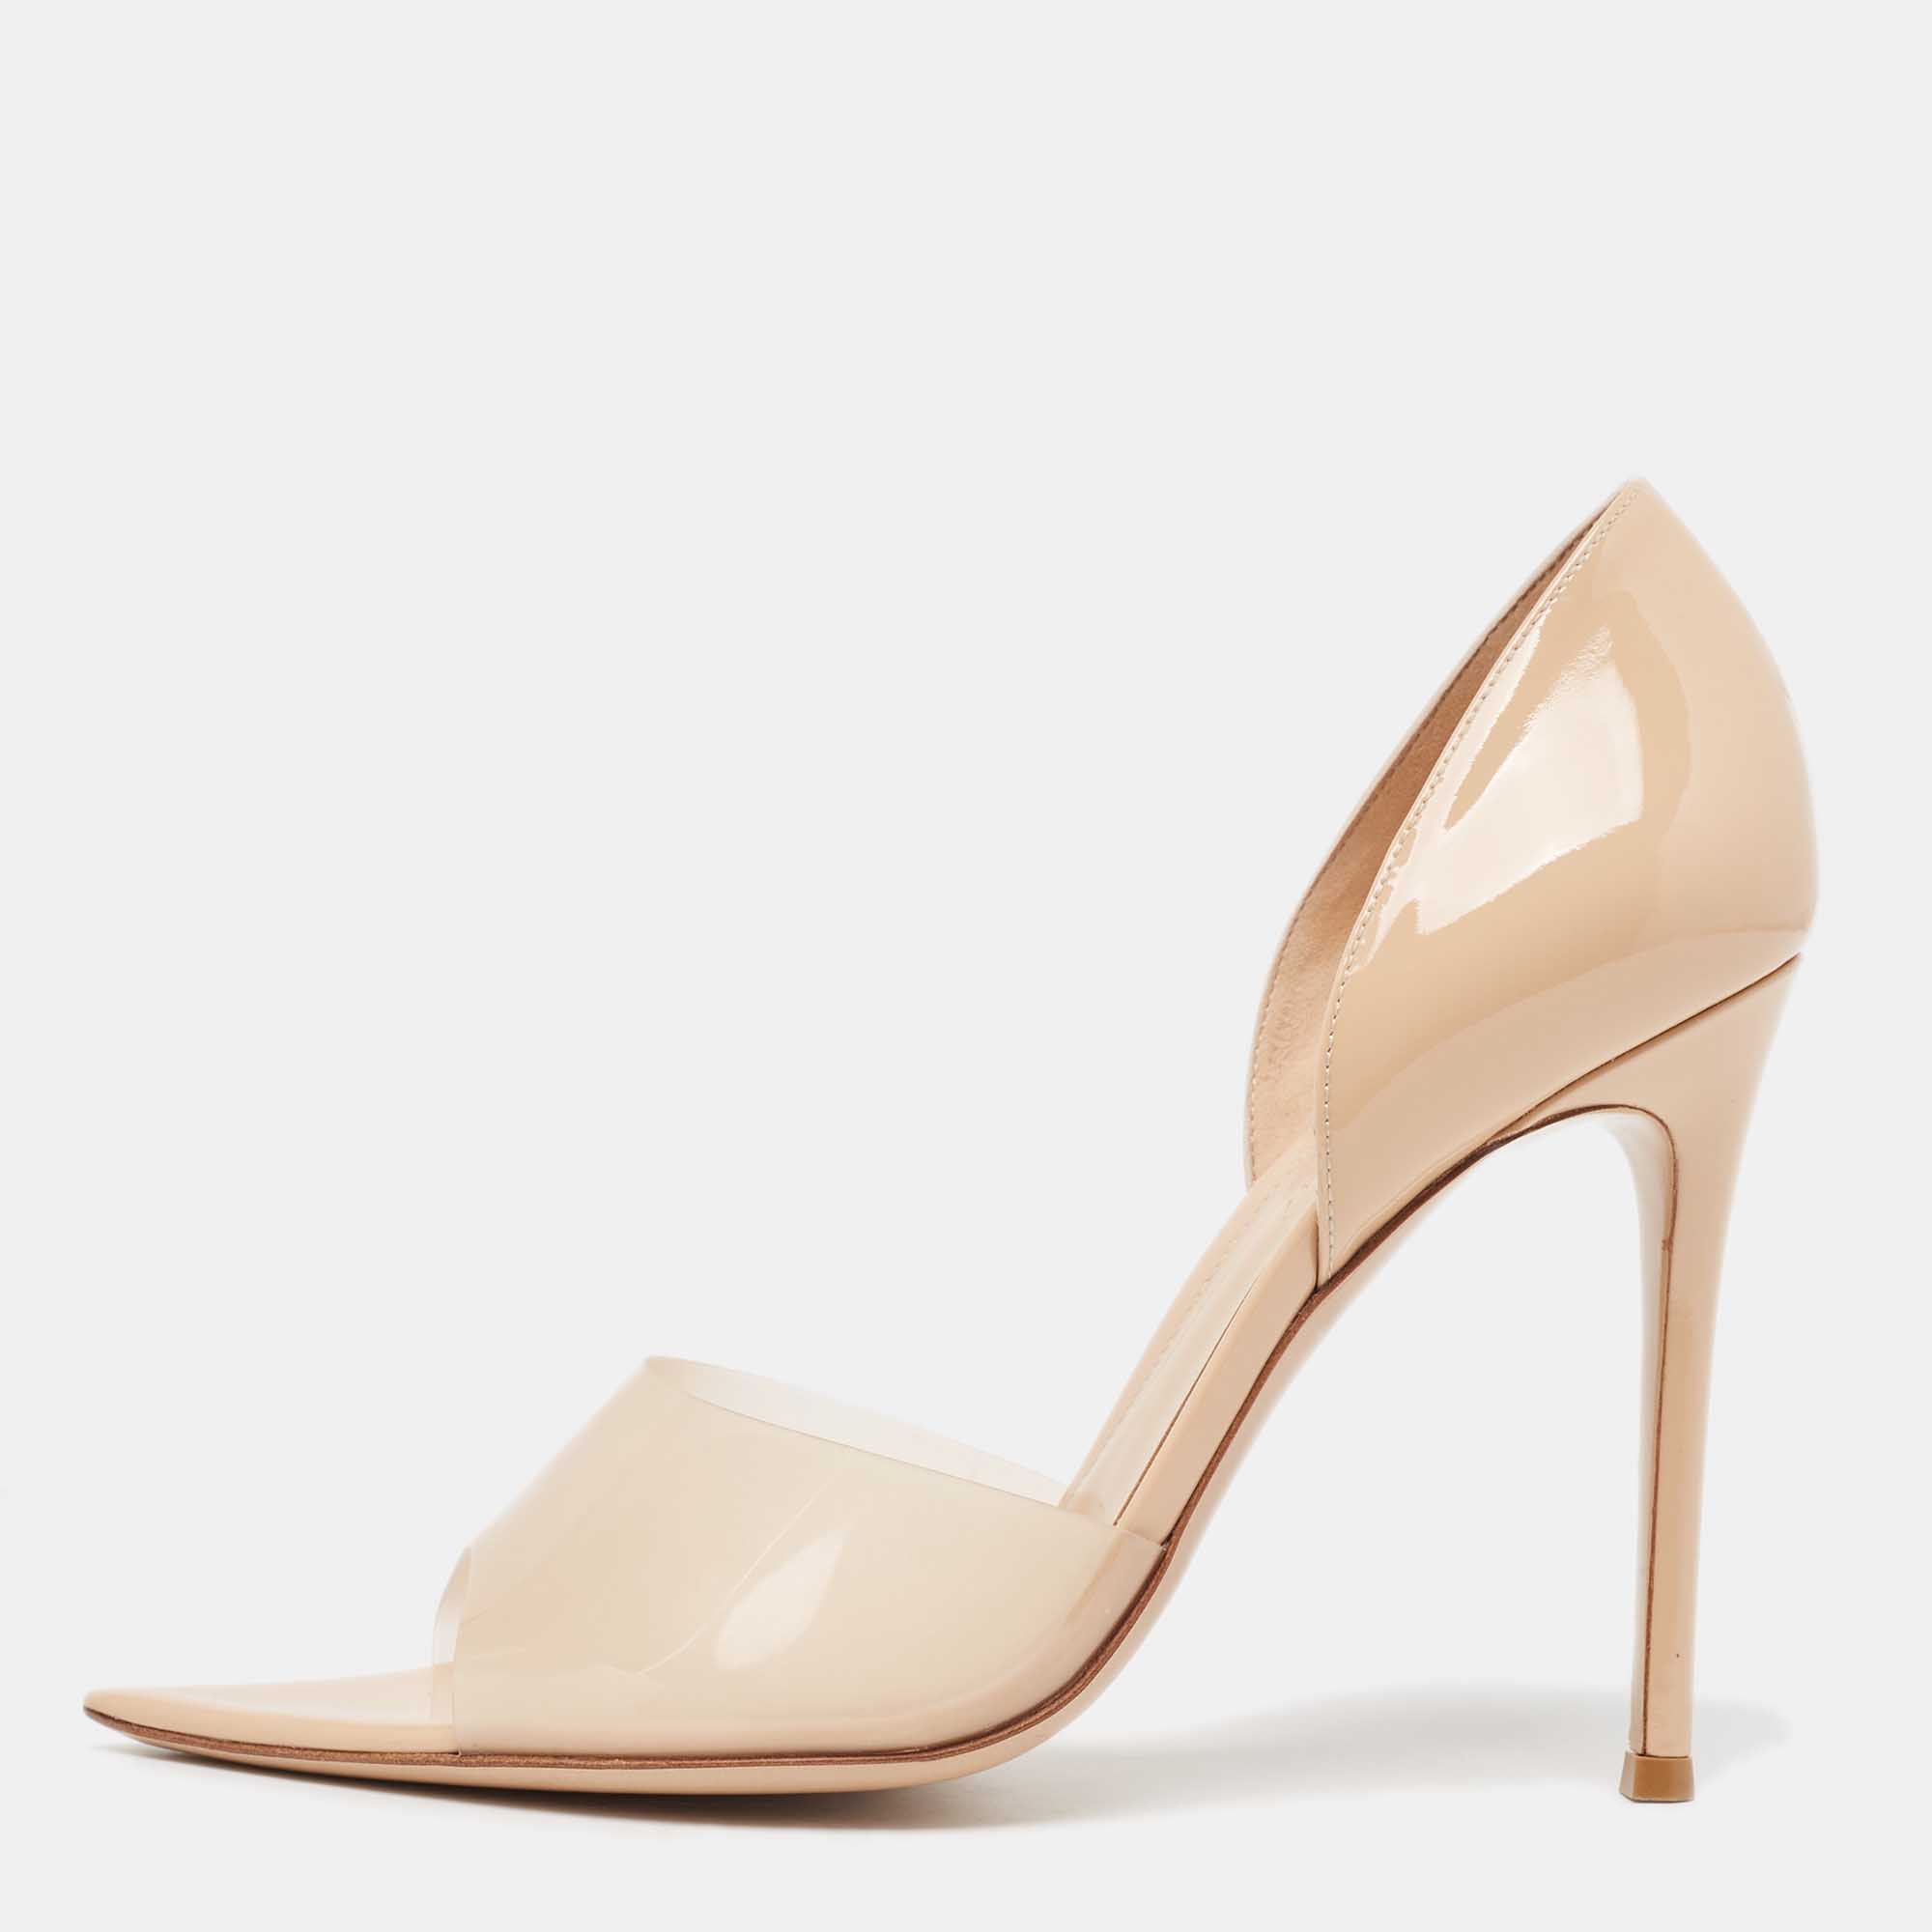 Gianvito rossi beige pvc and patent leather bree pumps size 40